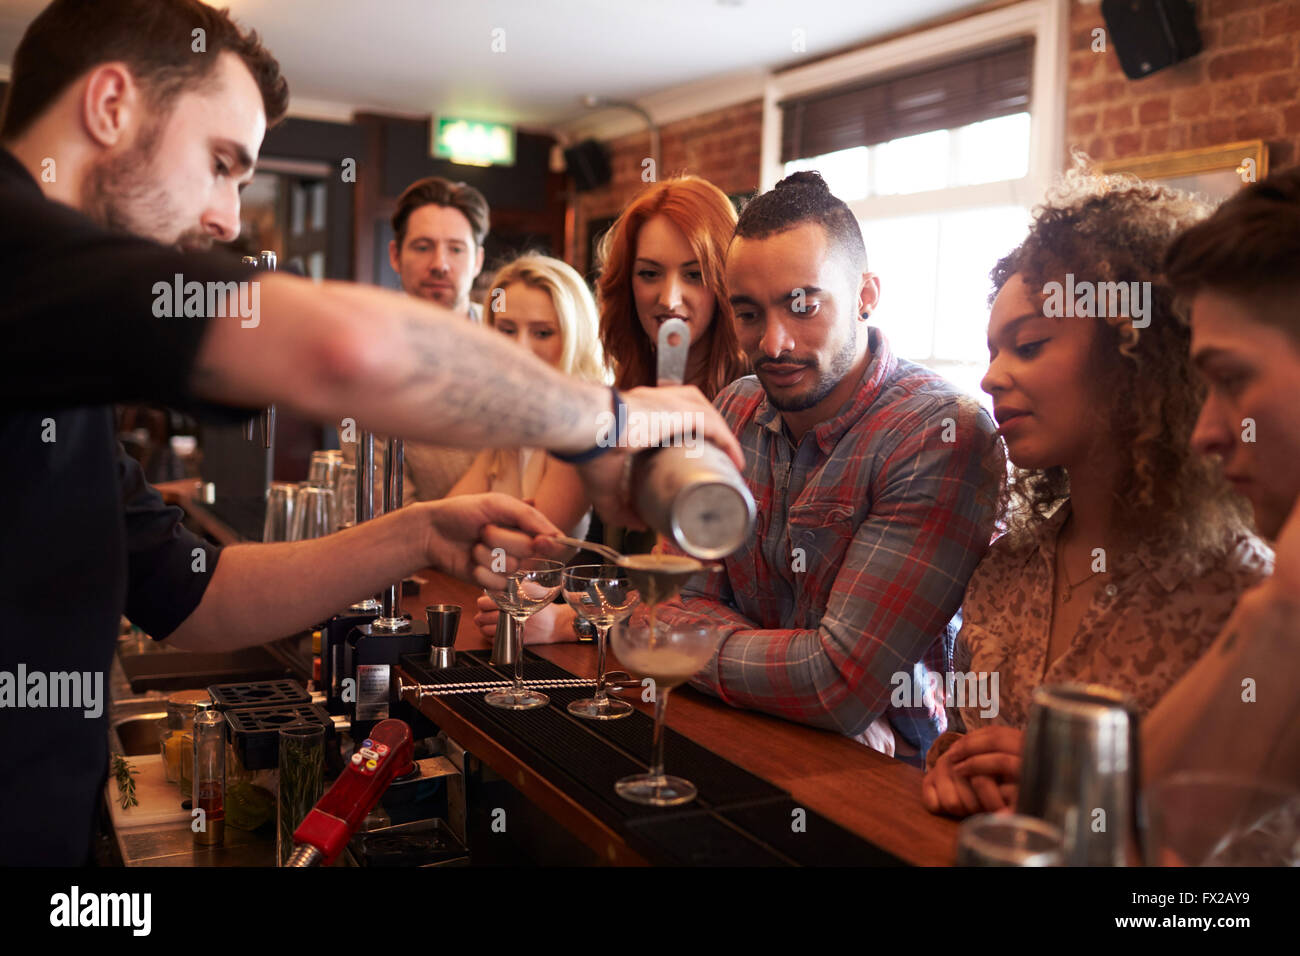 Bartender Giving Cocktail Making Lesson to Friends In Bar Stock Photo